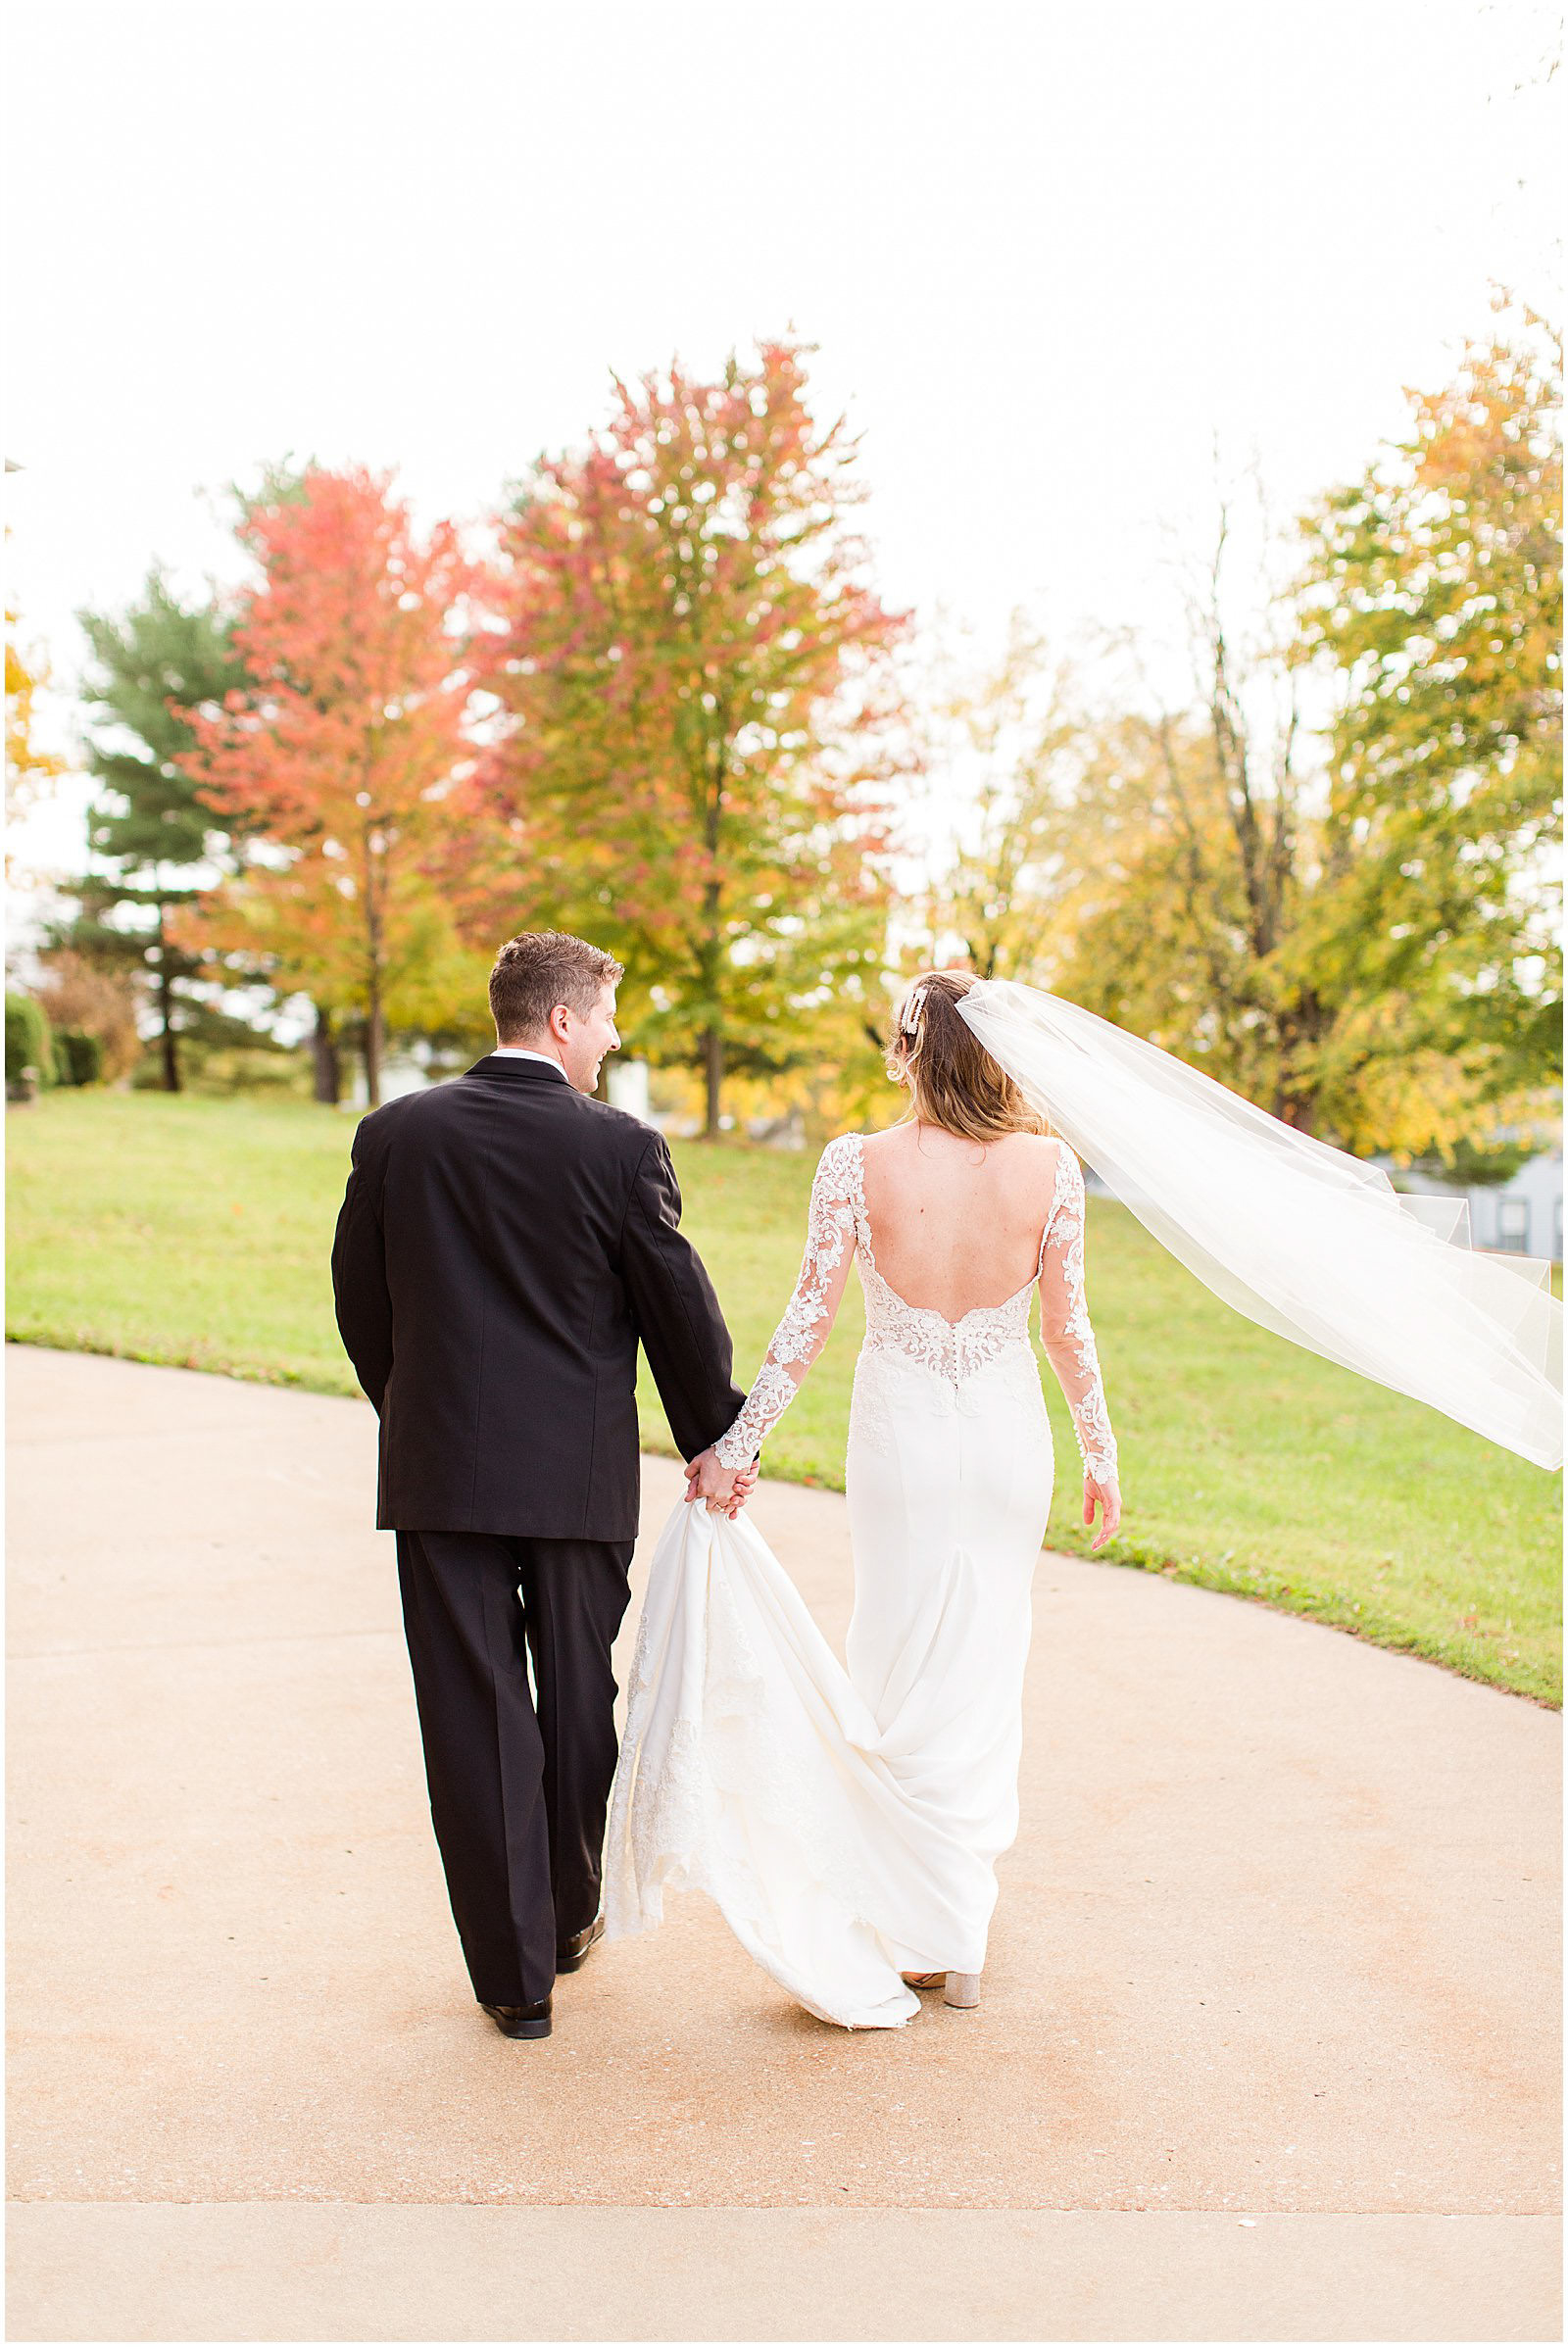 A Romantic Fall Wedding in Ferdinand, IN | Tori and Kyle | Bret and Brandie Photography 0119.jpg